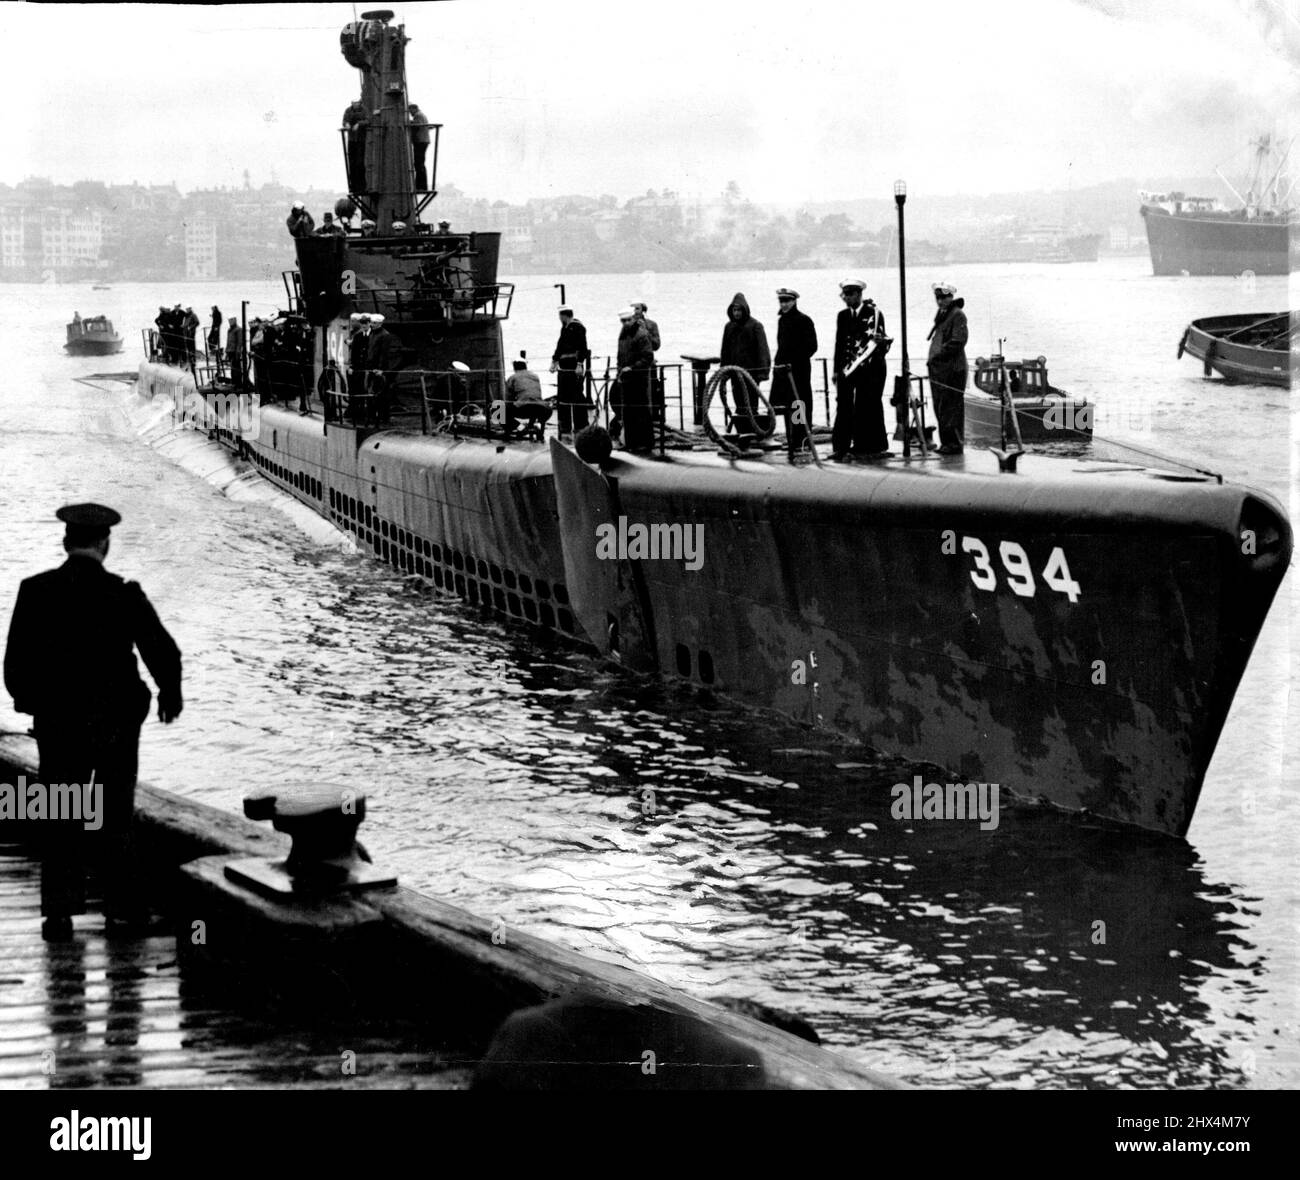 US Submarine Razorback arrives in Sydney on a cruise of the Pacific. The sub. berthing at no 4 West Circular Quay where it will remain until Friday. Public inspection will be on each day from 1pm to 4pm. The sub. which is 300ft long was built in 1944 and carries a crew of 65 officers & men. December 15, 1947. Stock Photo